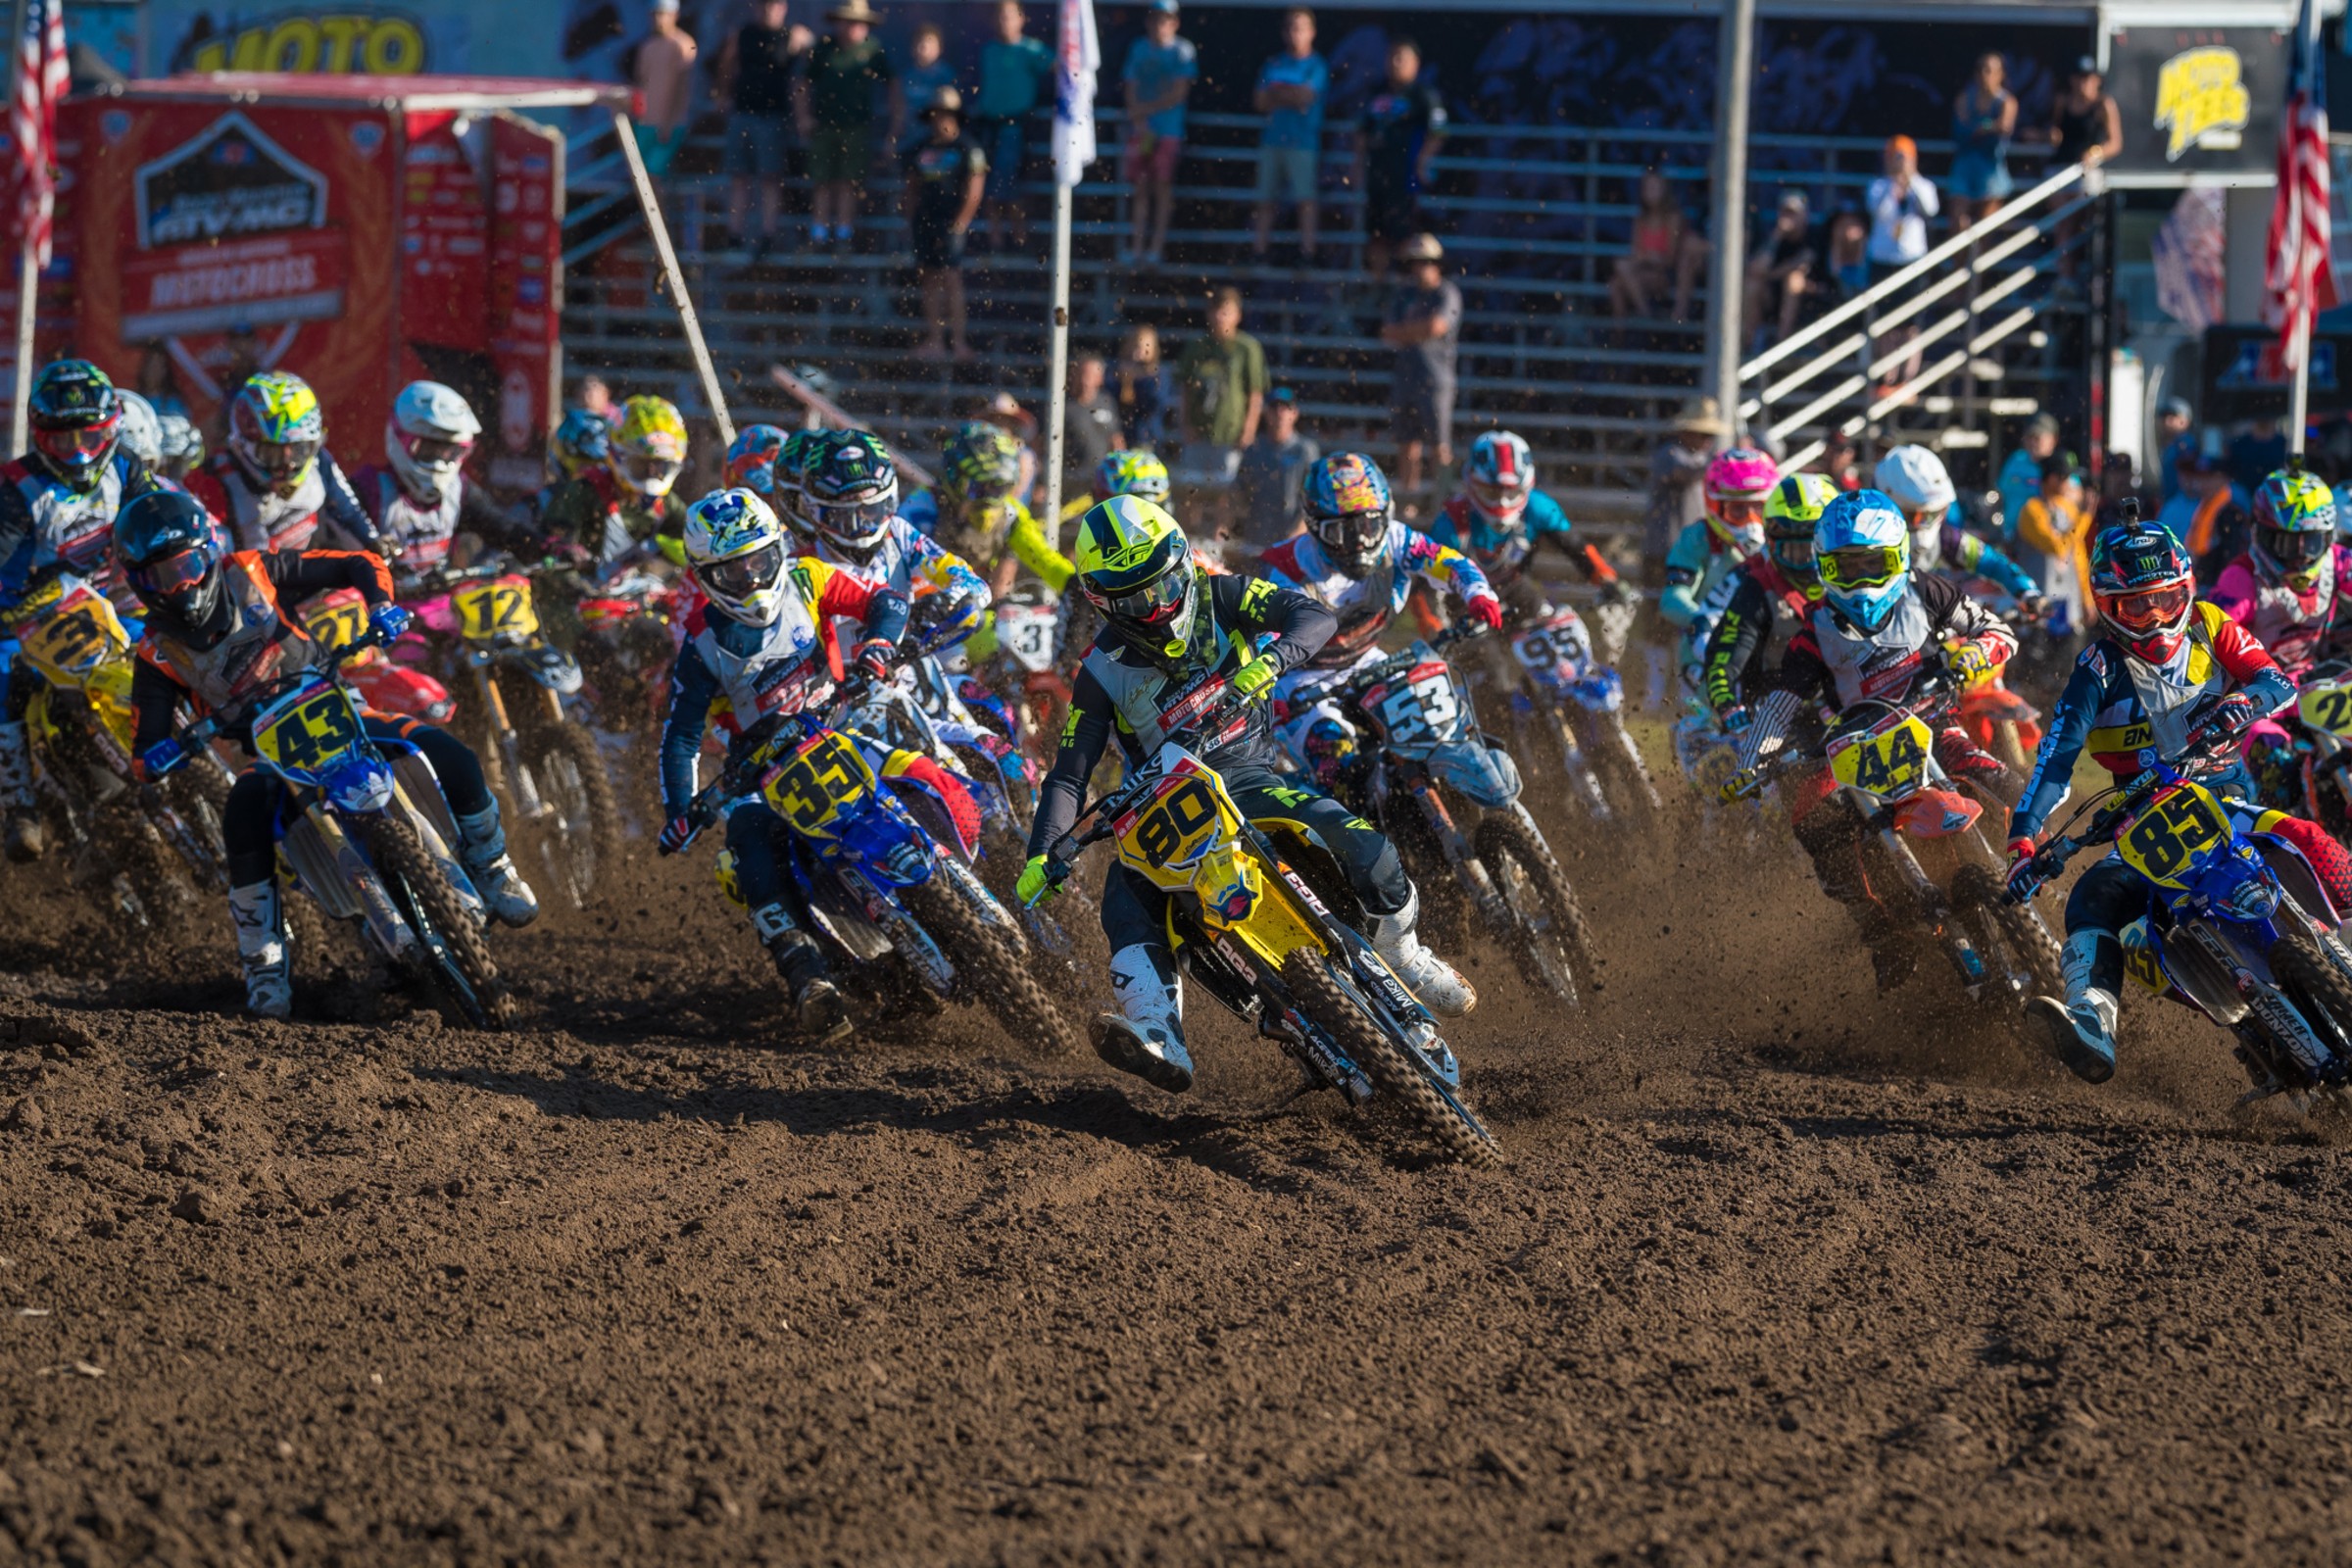 GNCC and Loretta's Qualifiers on May 2/3 Postponed, Pro Motocross